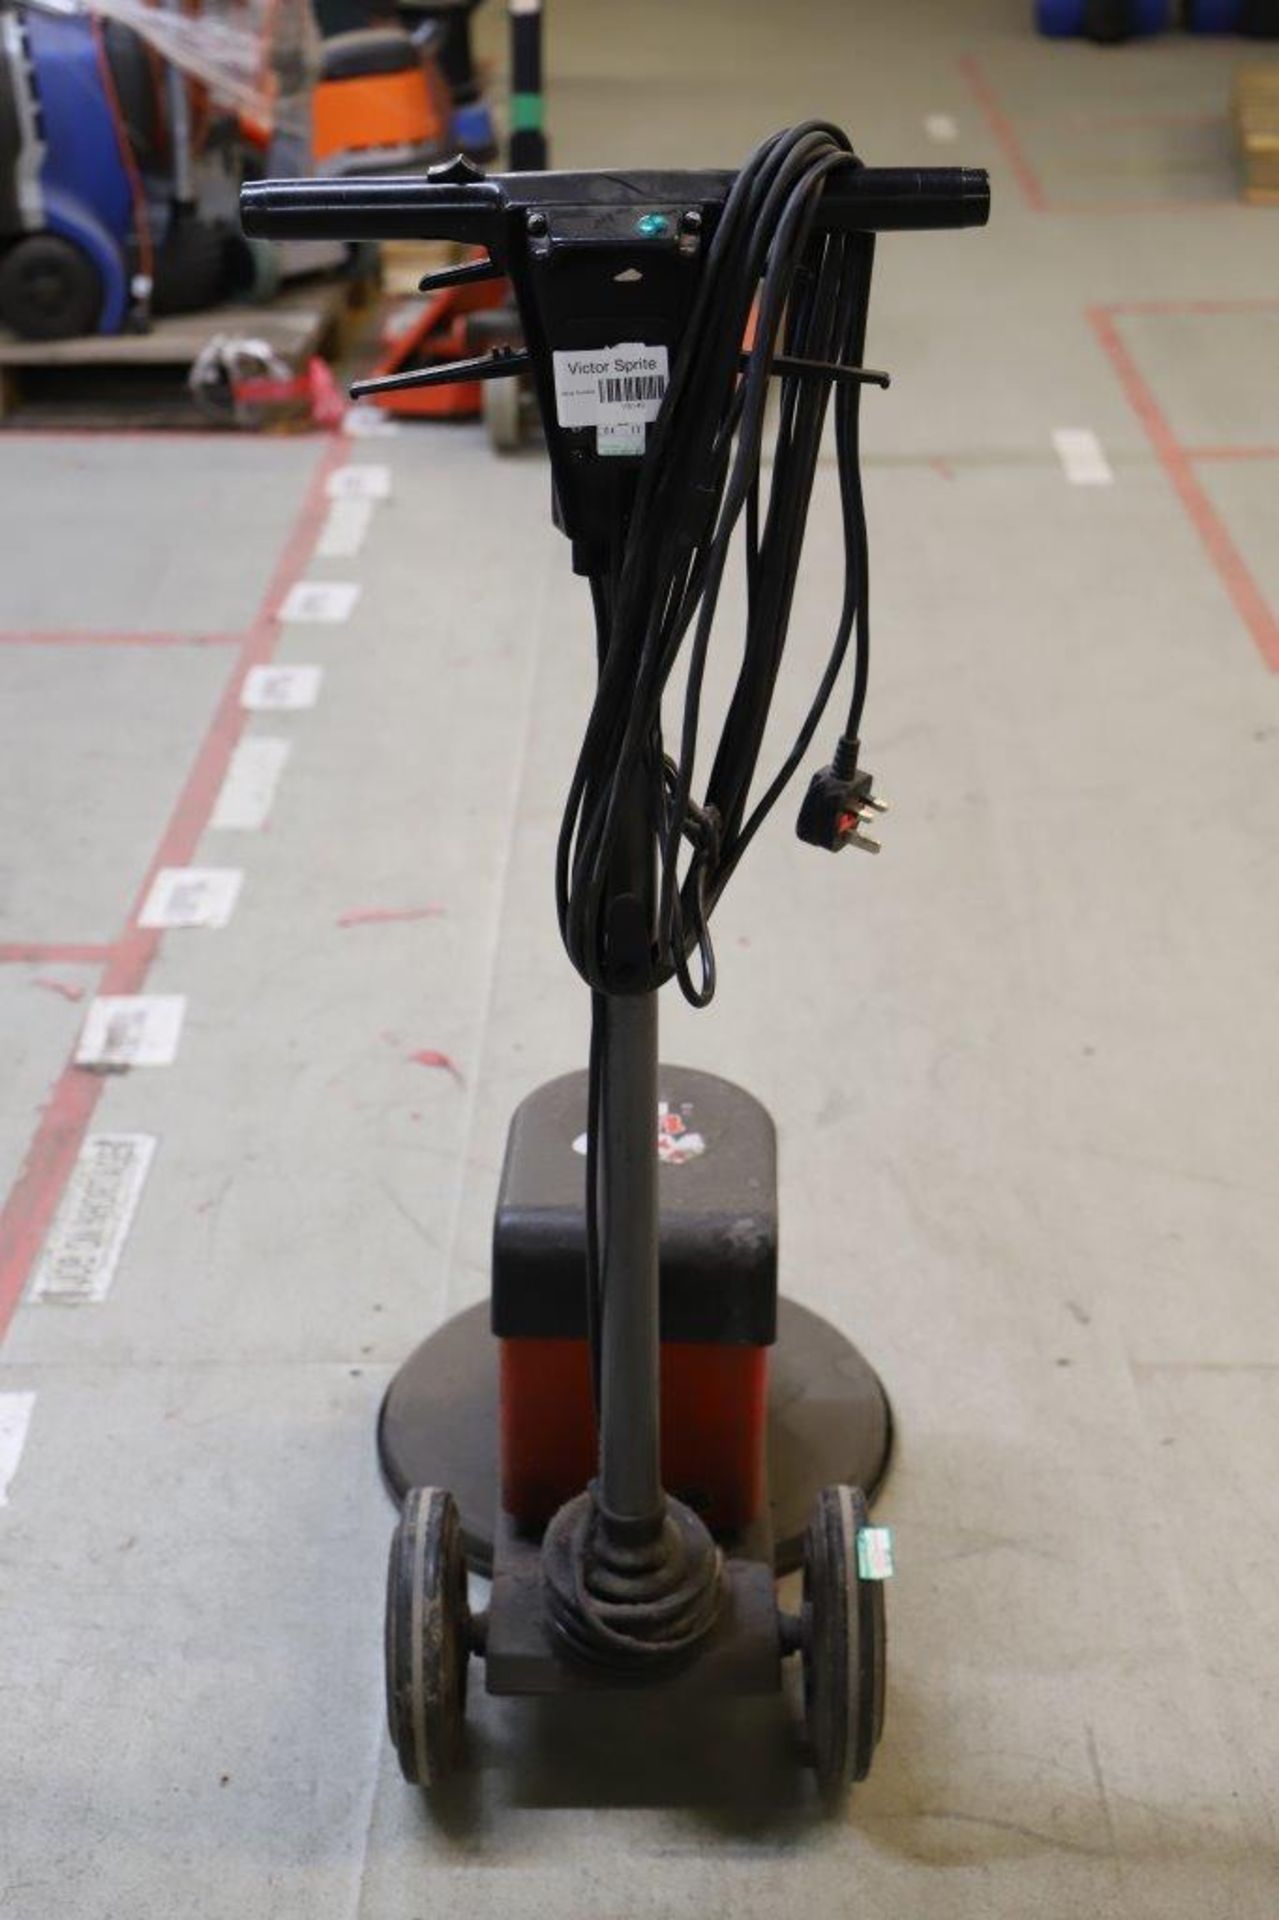 PAT tested Industrial cleaning machines, includes: HV380 BUFFER, TRUVOX, VICTOR SPRITE. - Image 6 of 6